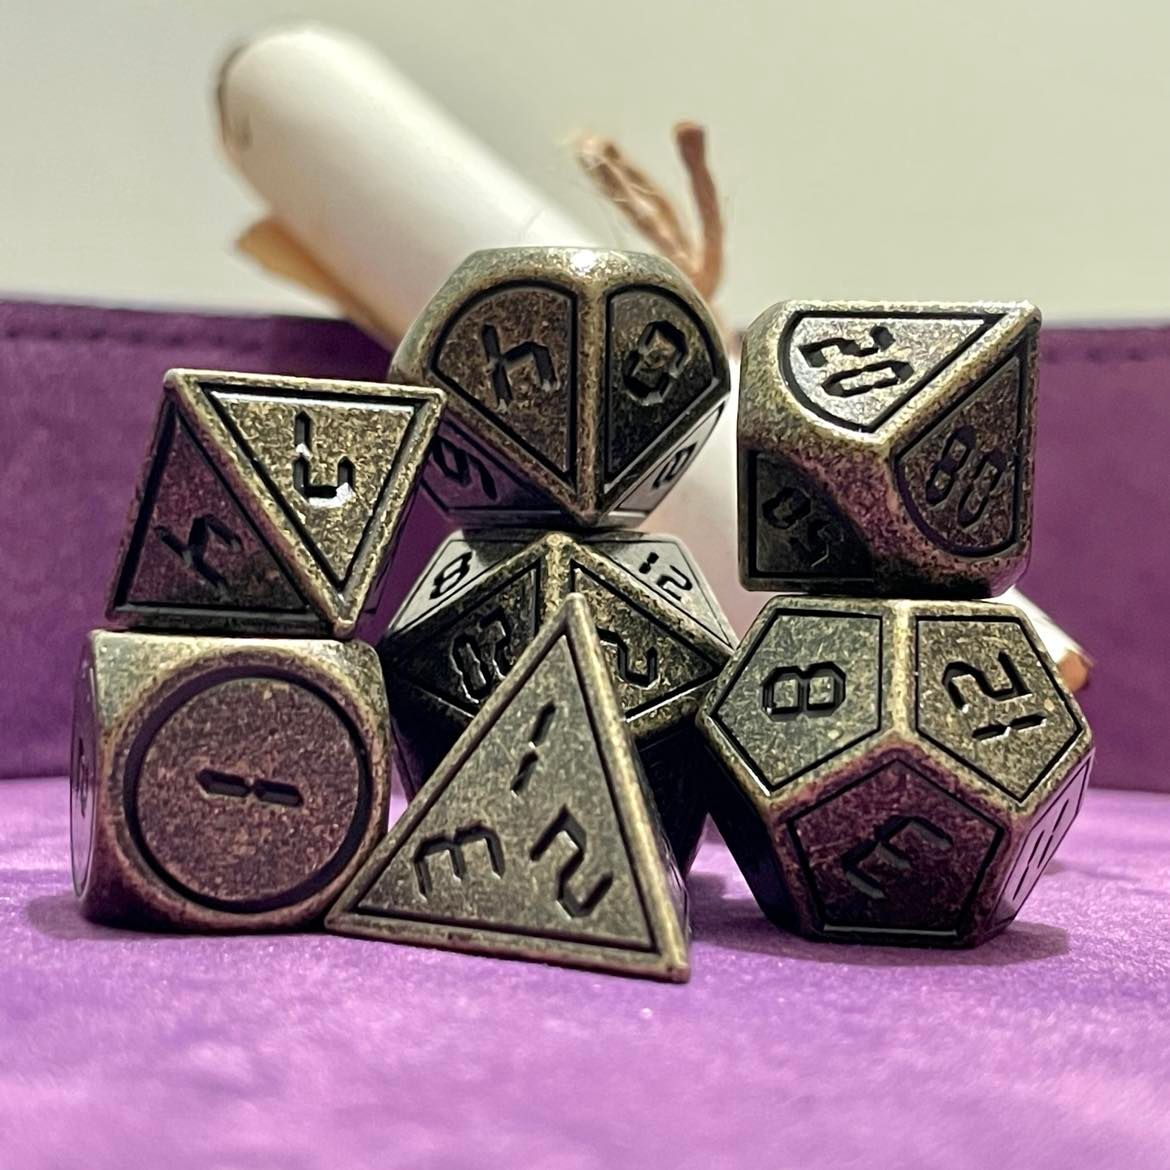 Artificer metal dnd dice set of 7 with background